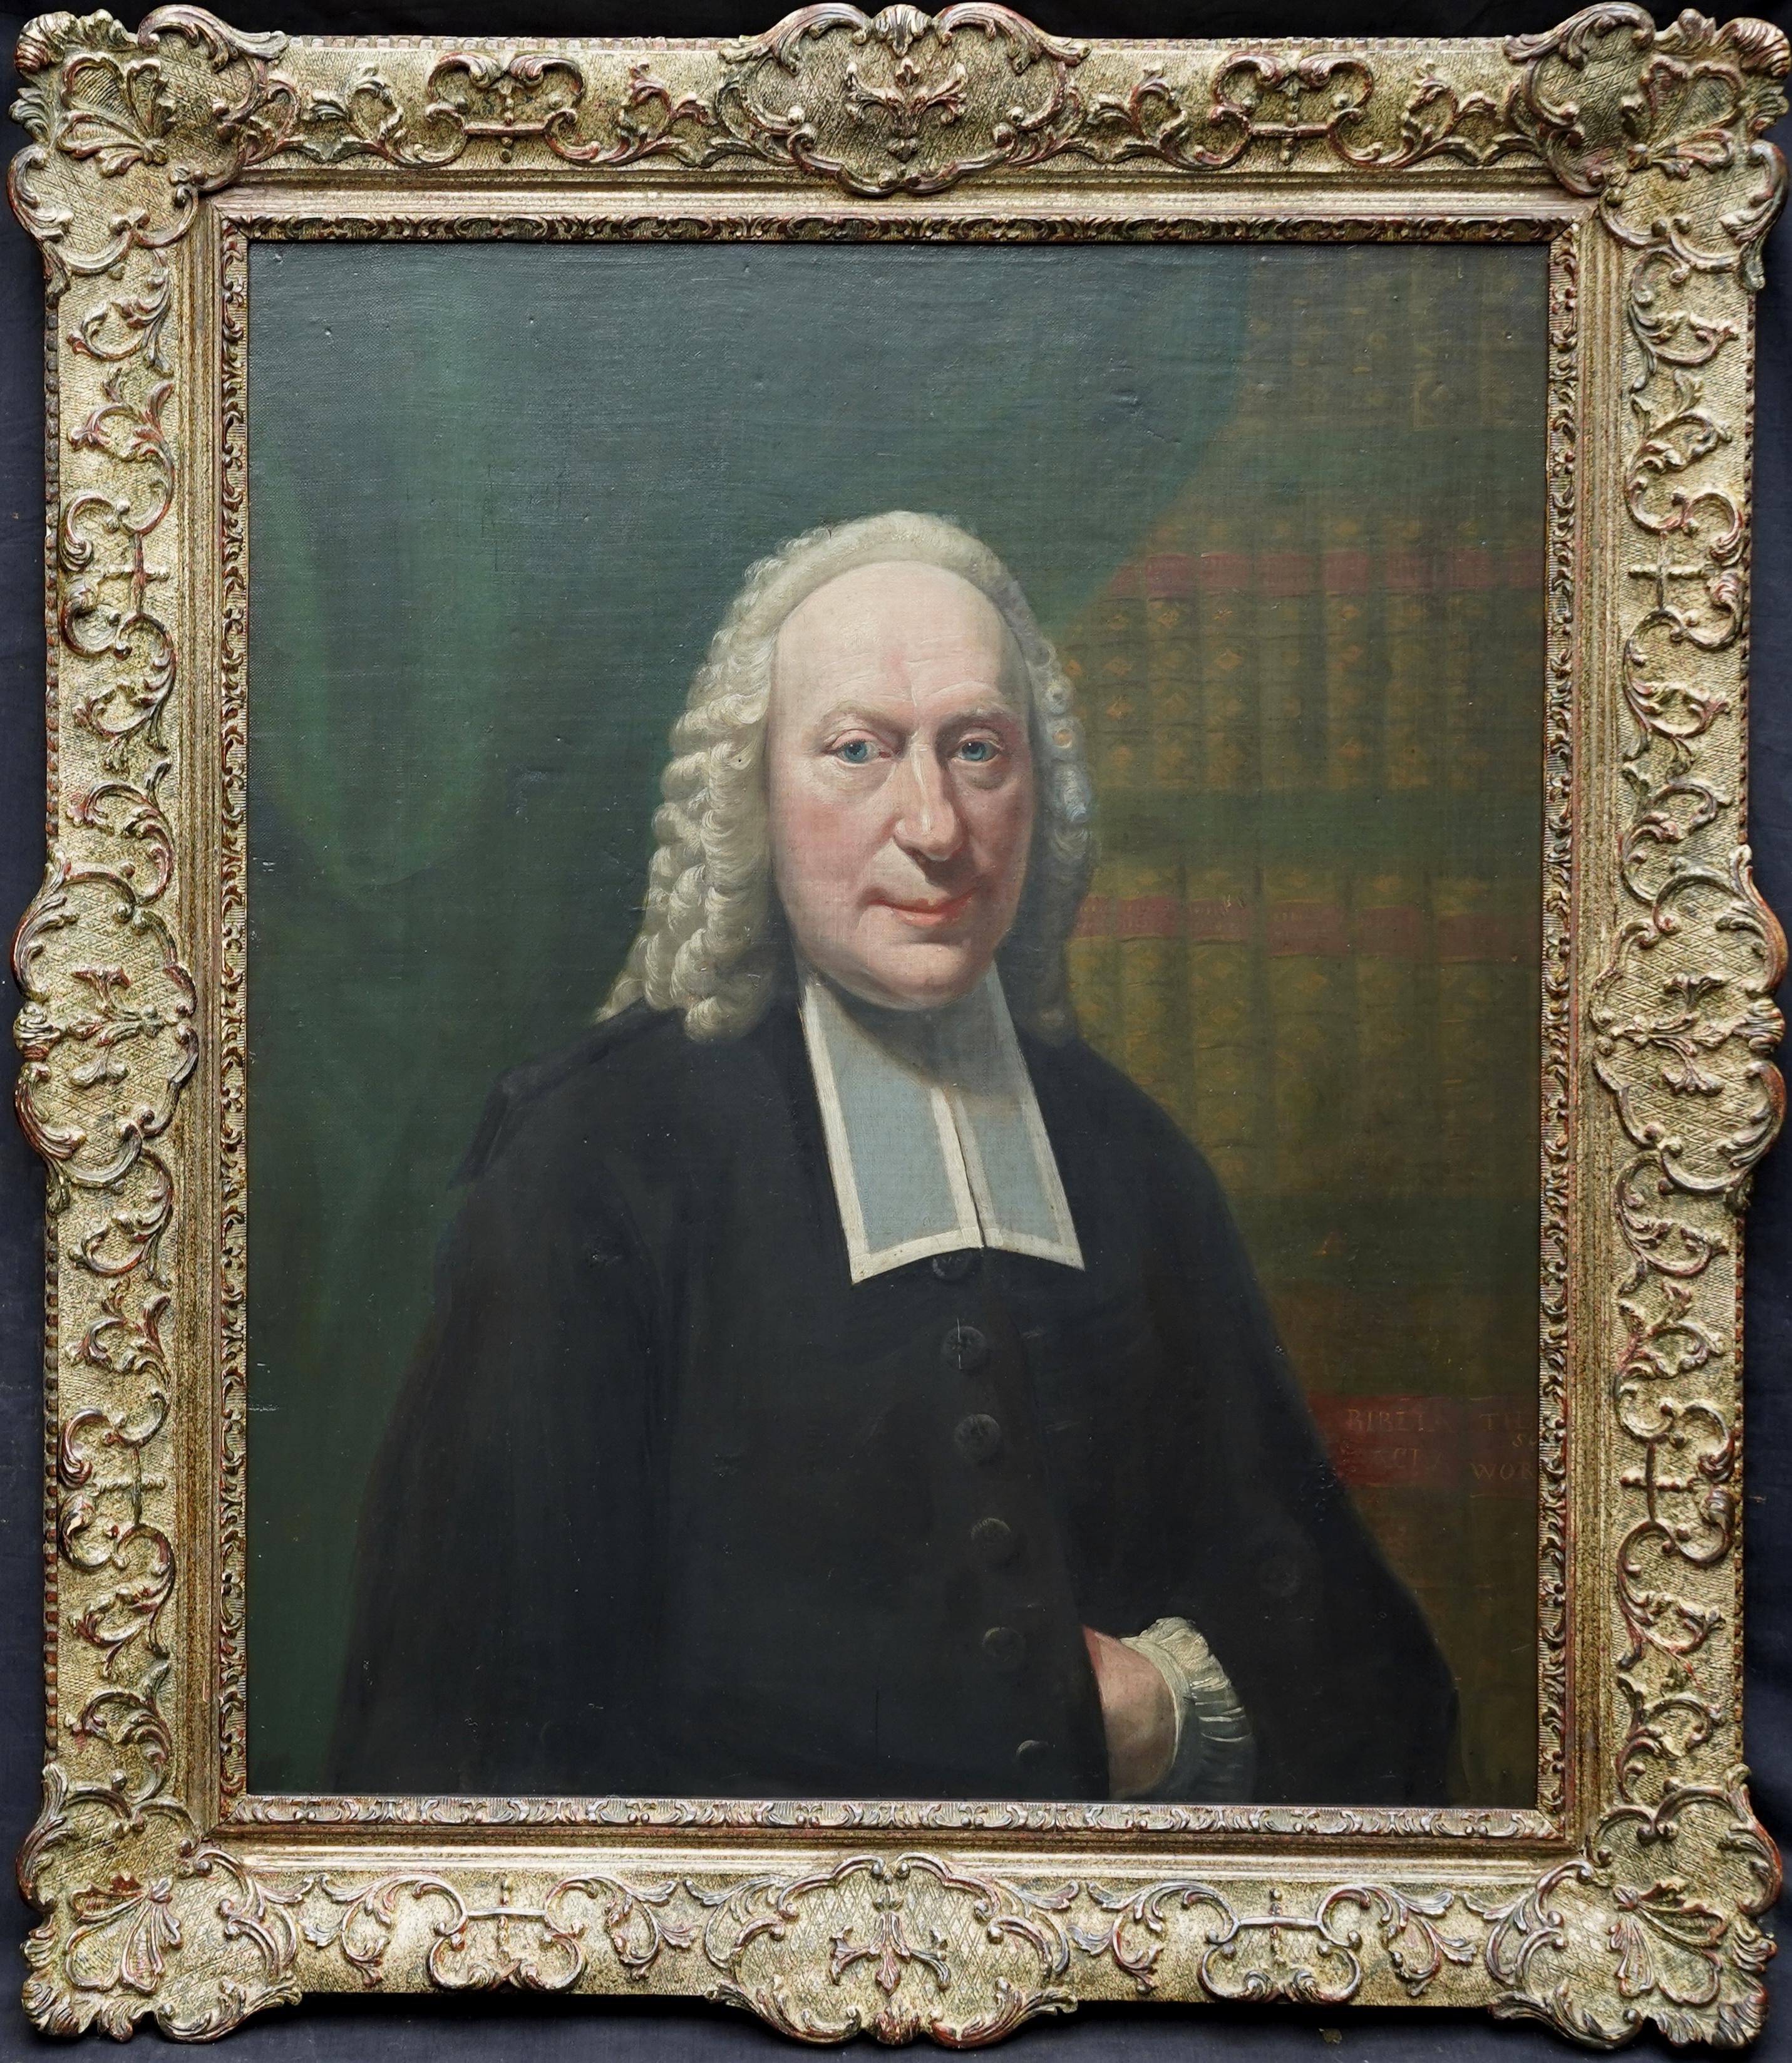 Joseph Highmore Portrait Painting - Portrait of a Cleric - British 18th century art Old Master oil painting 